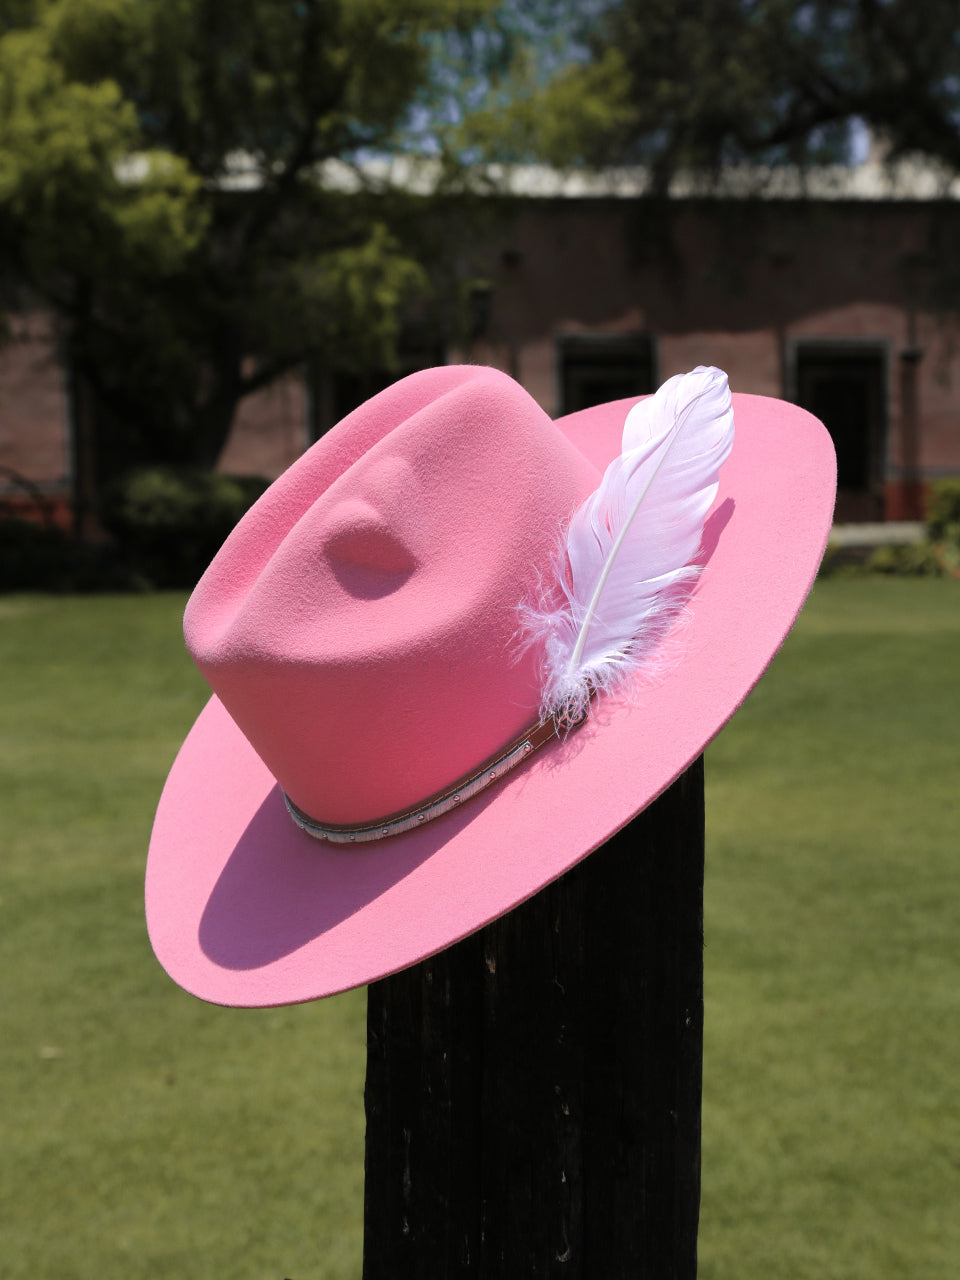 H0007 - PINK COWGIRL HAT WITH HATBAND AND WHITE FEATHER